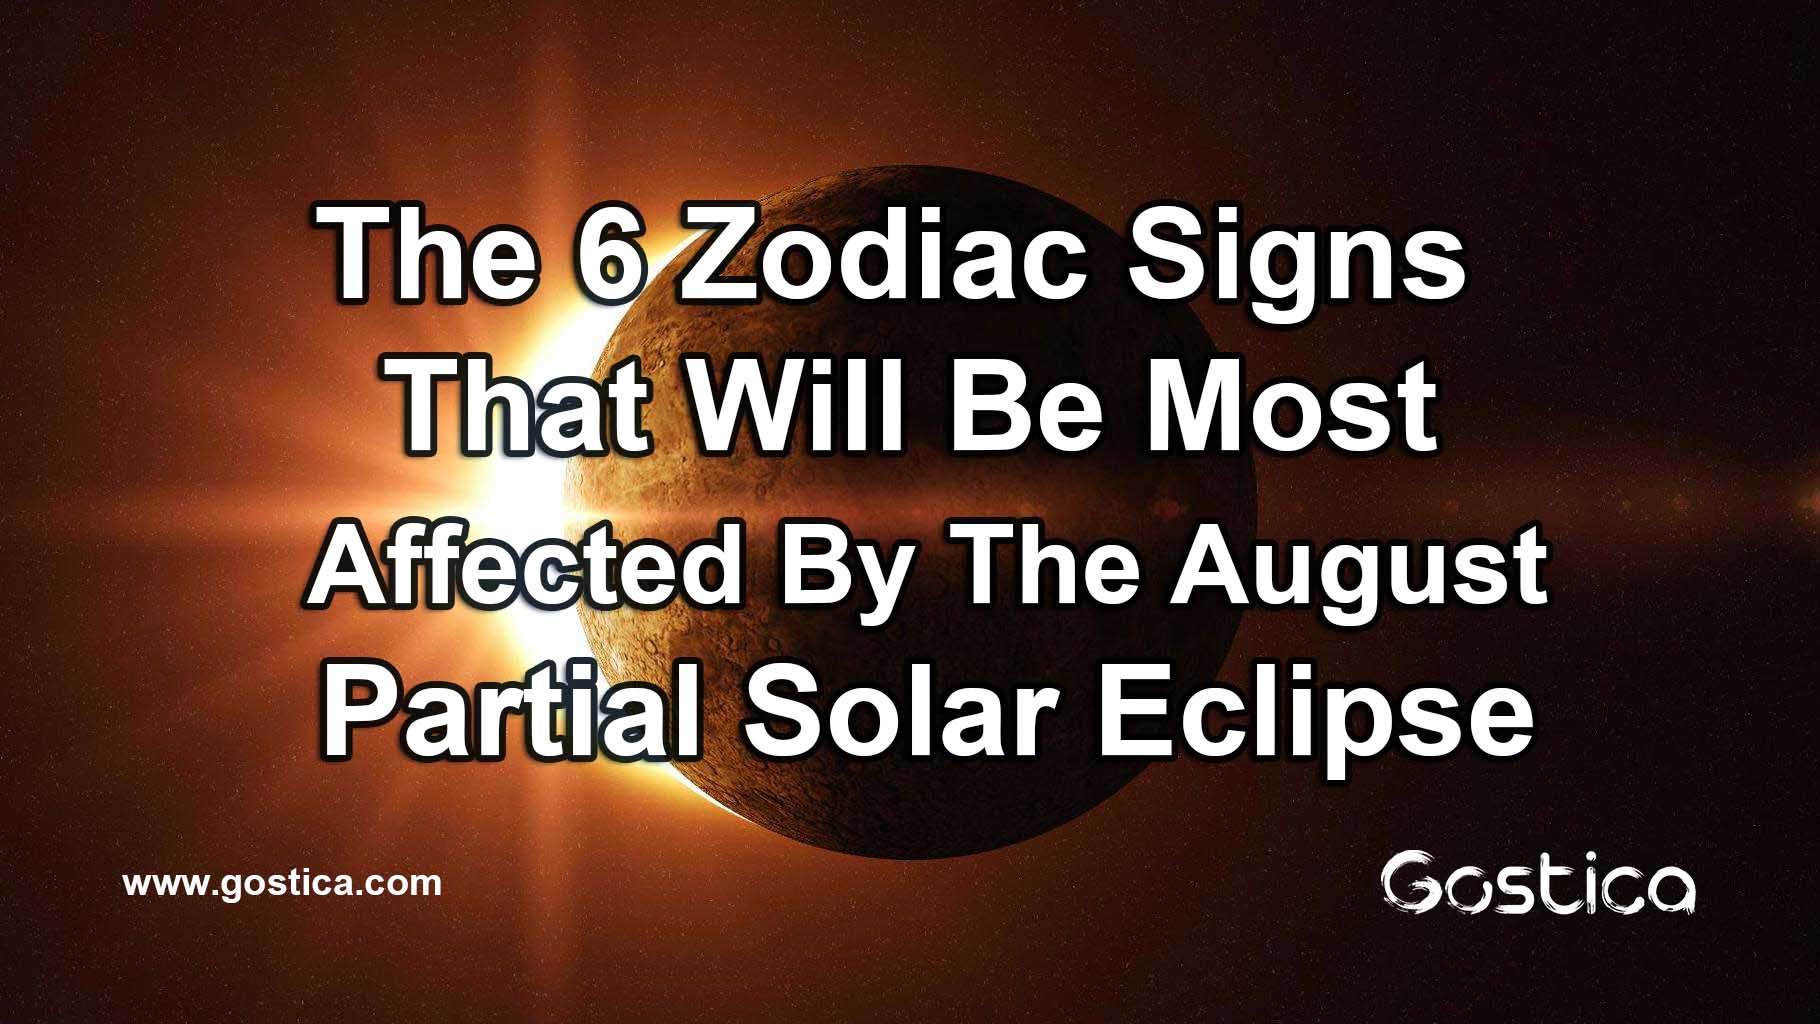 The-6-Zodiac-Signs-That-Will-Be-Most-Affected-By-The-August-Partial-Solar-Eclipse.jpg